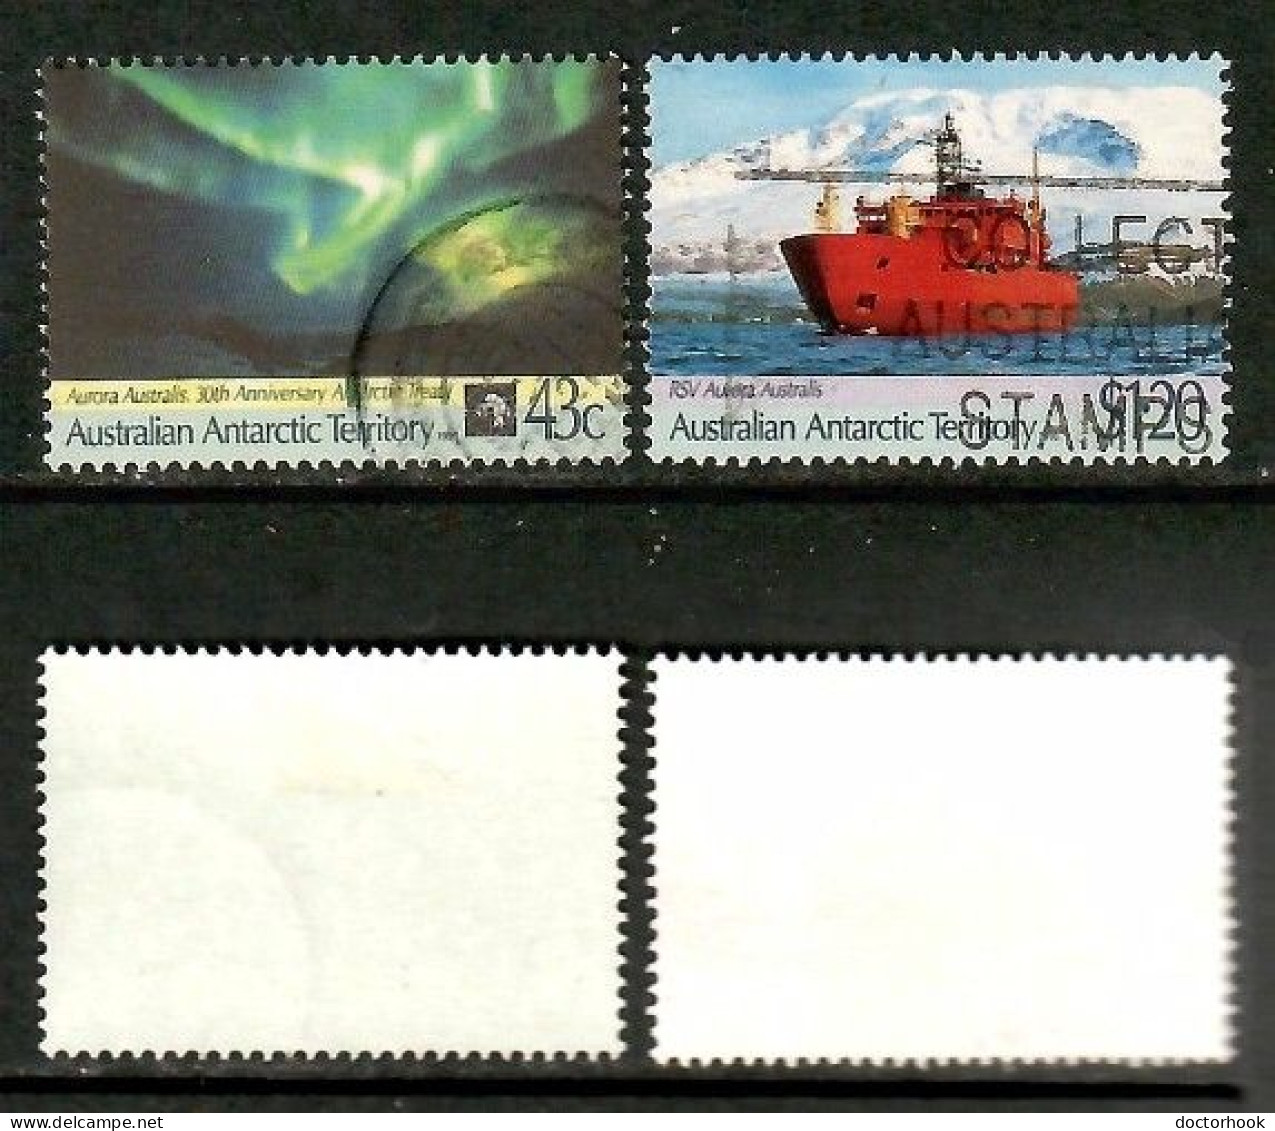 AUSTRALIAN ANTARCTIC TERRITORY   Scott # L 81-2 USED (CONDITION AS PER SCAN) (Stamp Scan # 1008-7) - Usados